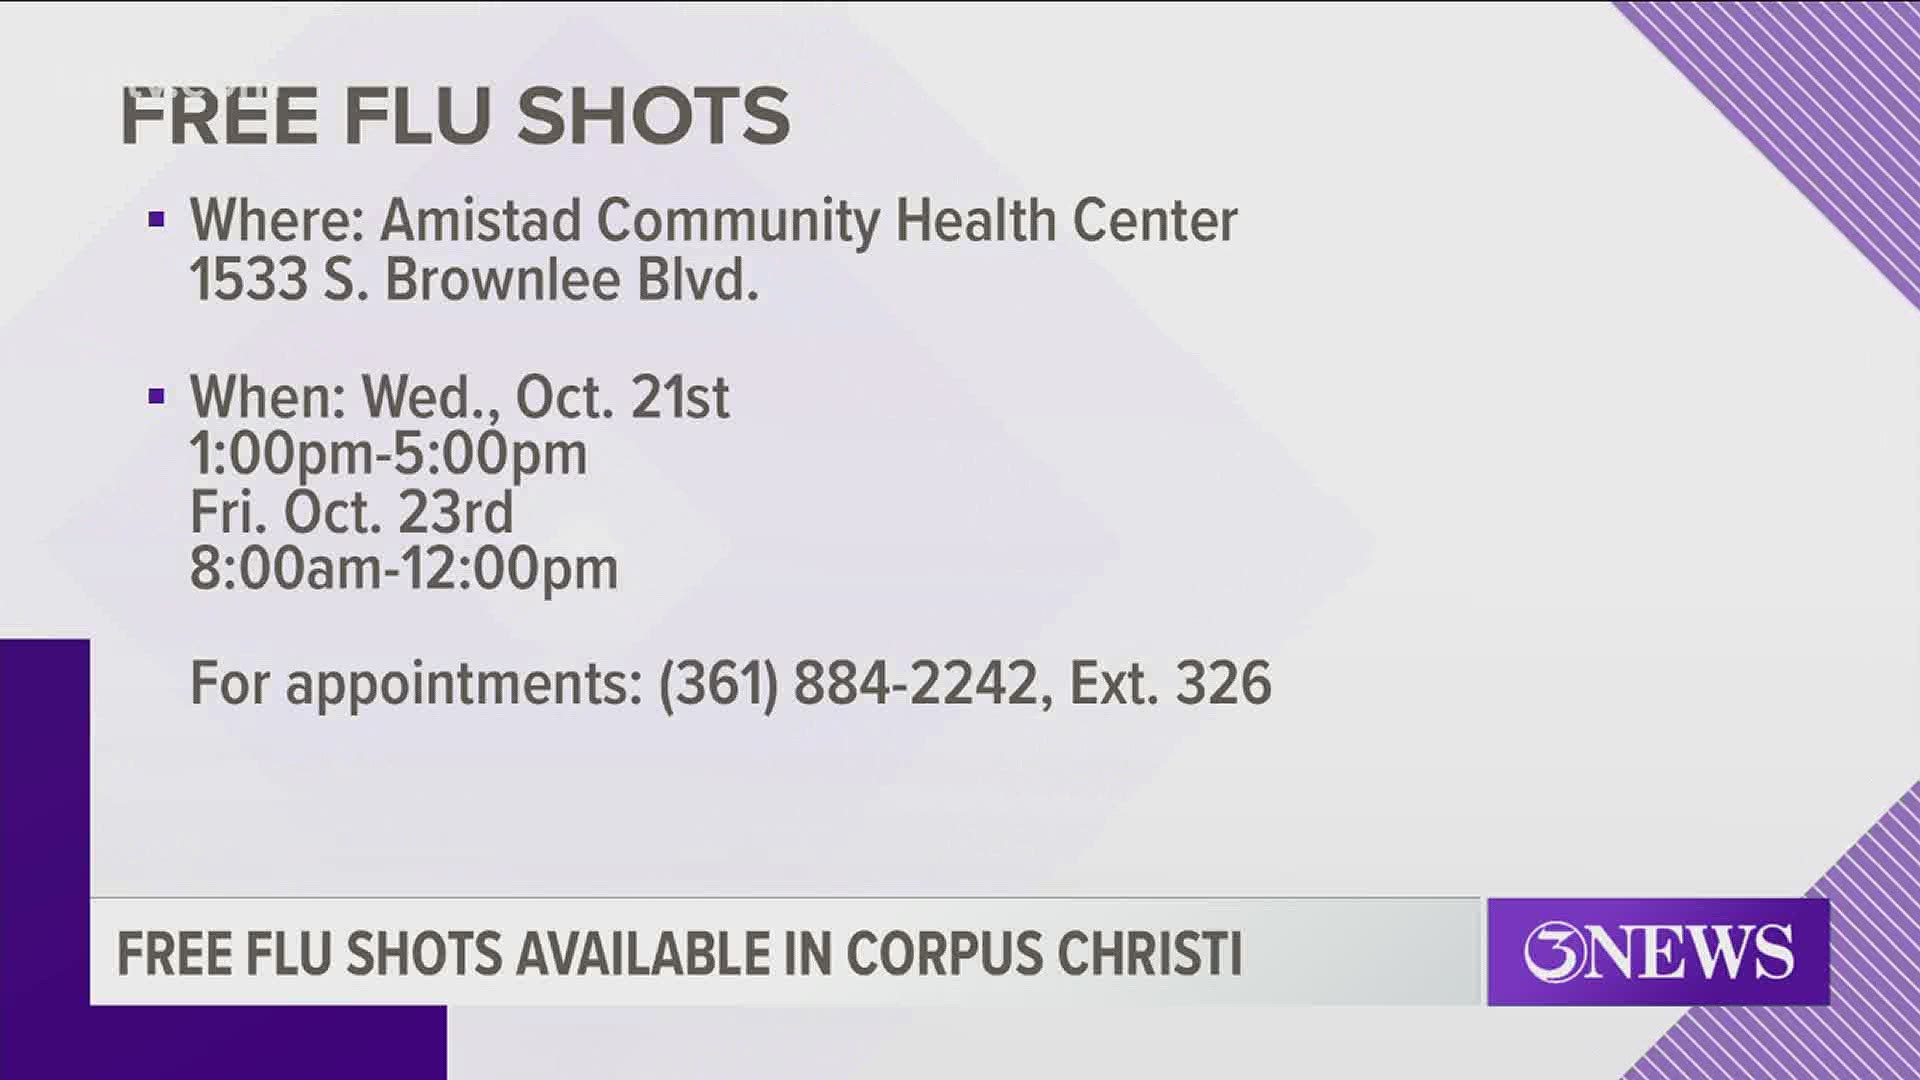 There will be two Wellness Clinics made possible by the Mayor's Disaster Relief Fund where free flu shots and A1c test will be given.